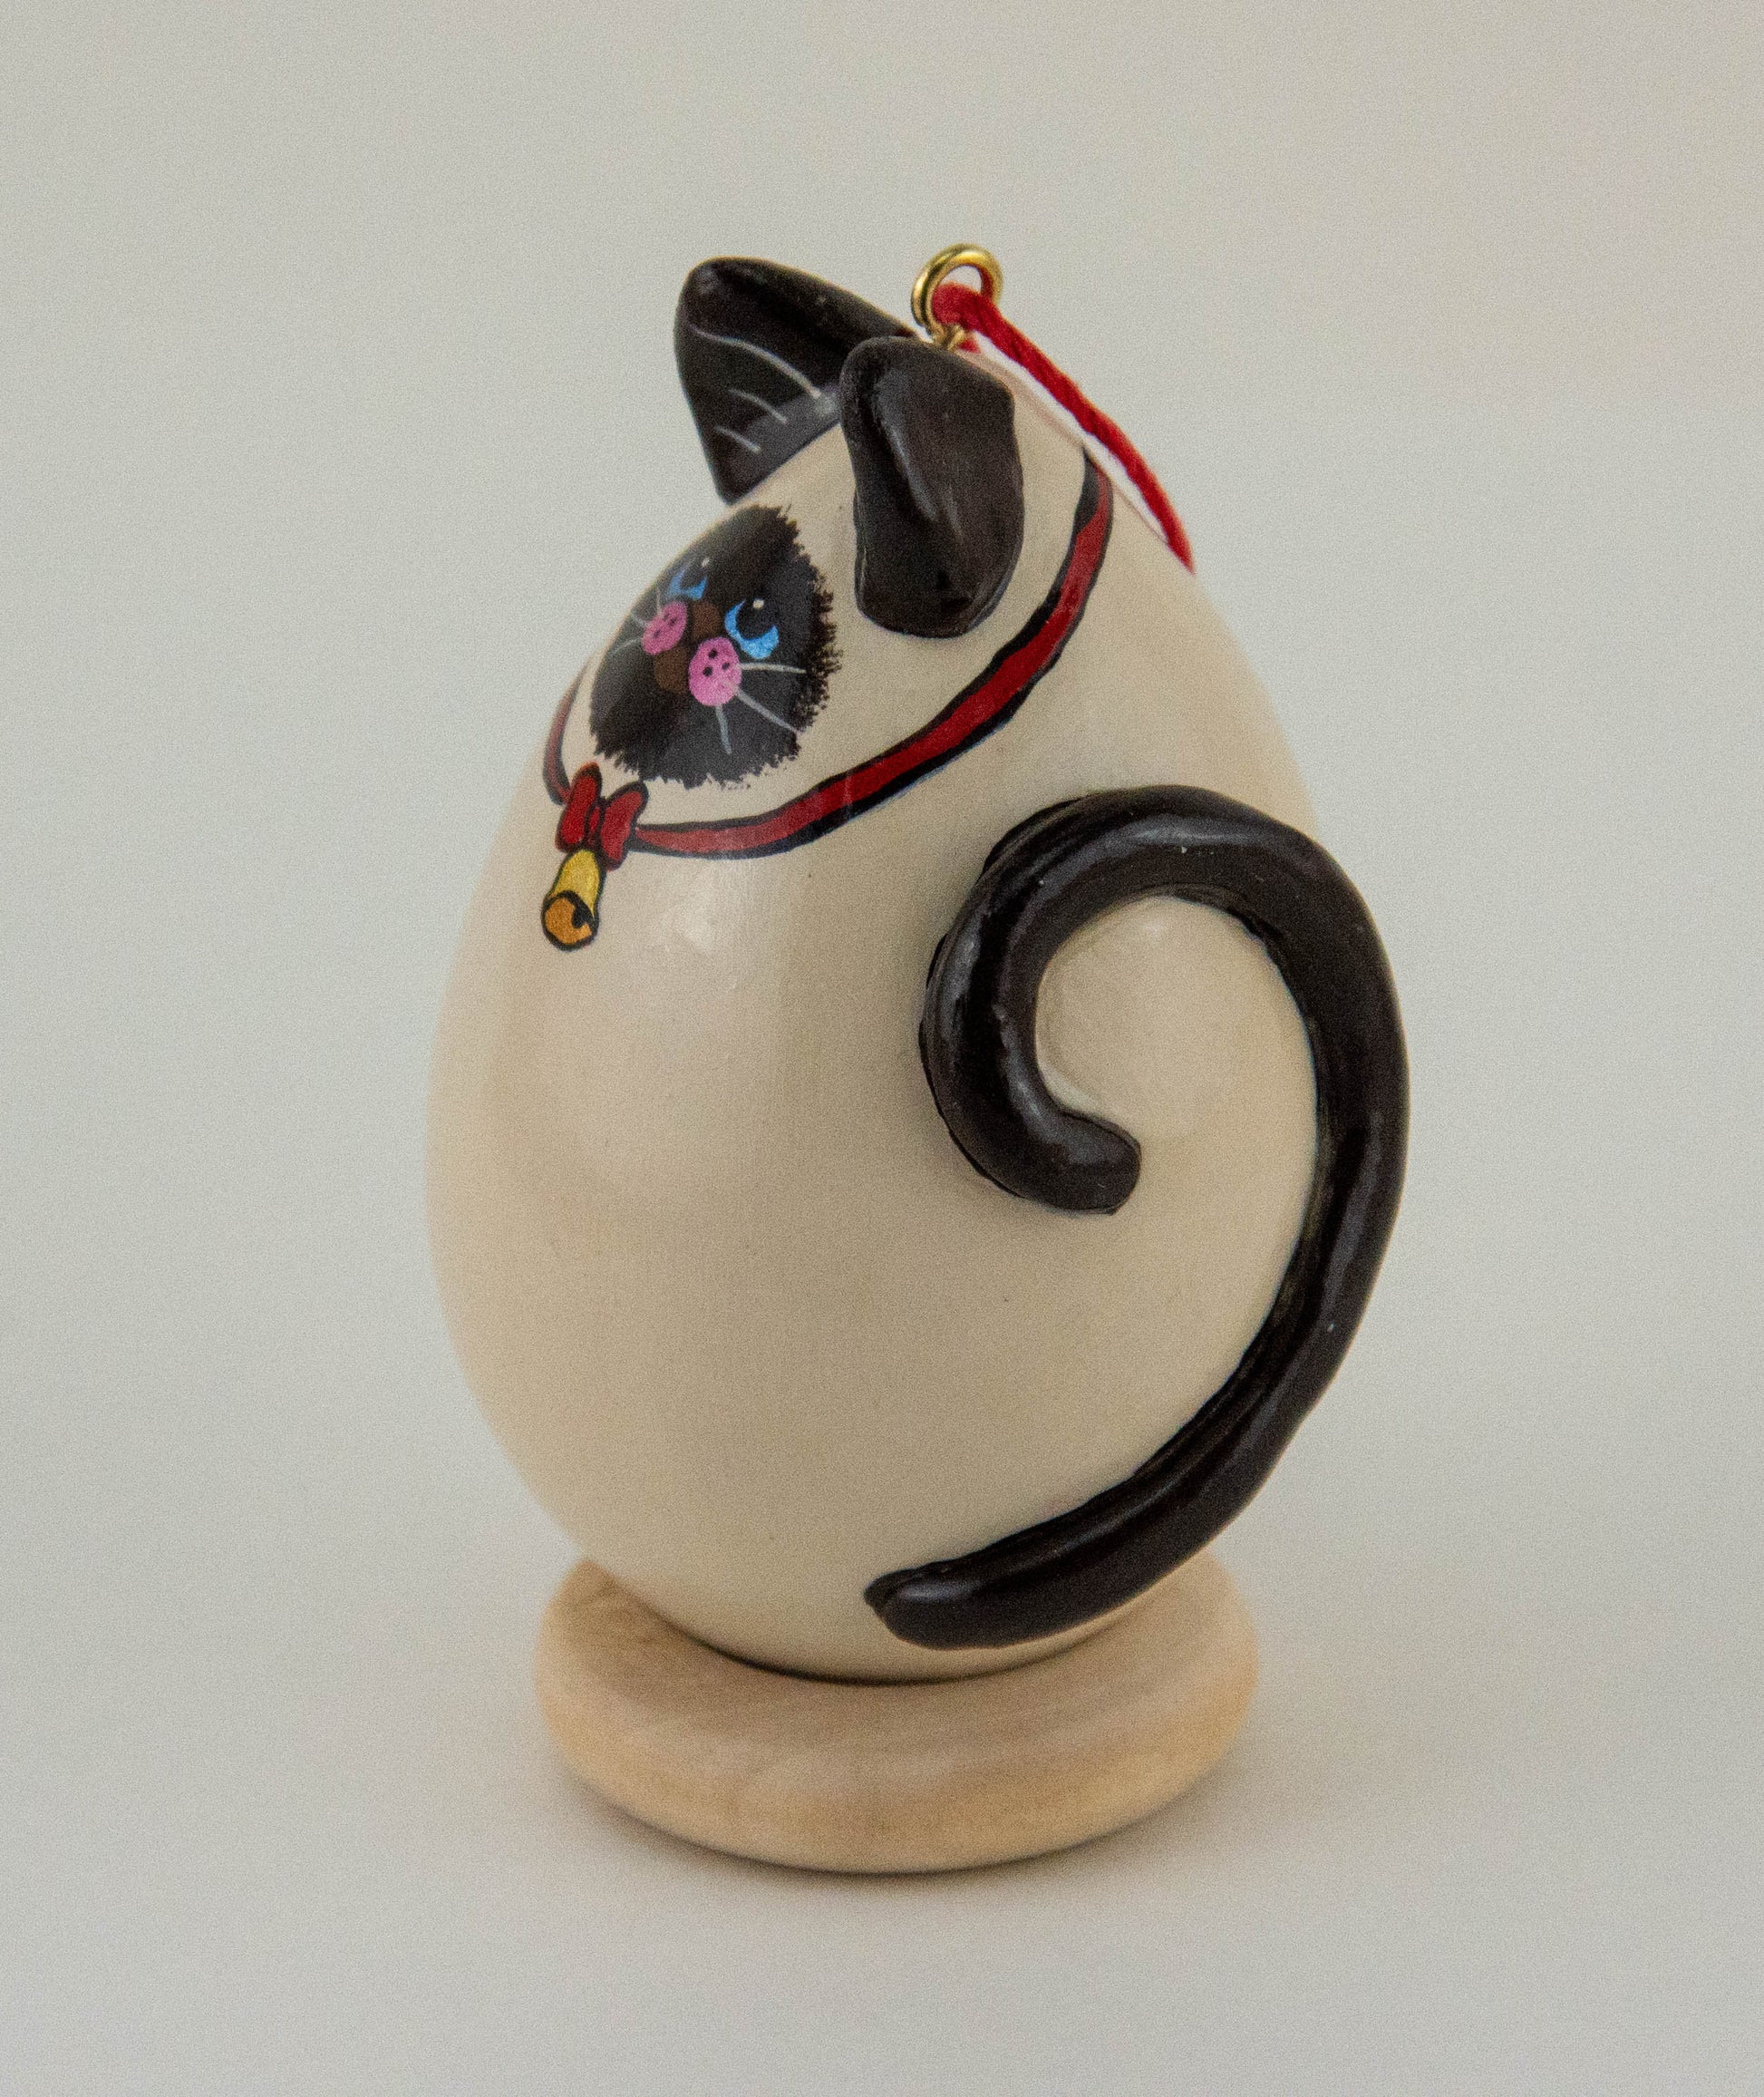 Siamese Cat, Gourd Ornaments, Red bow, bell, Siamese decor, Kitty Ornament,  Siamese Cat Lover Gift, - Gourdaments